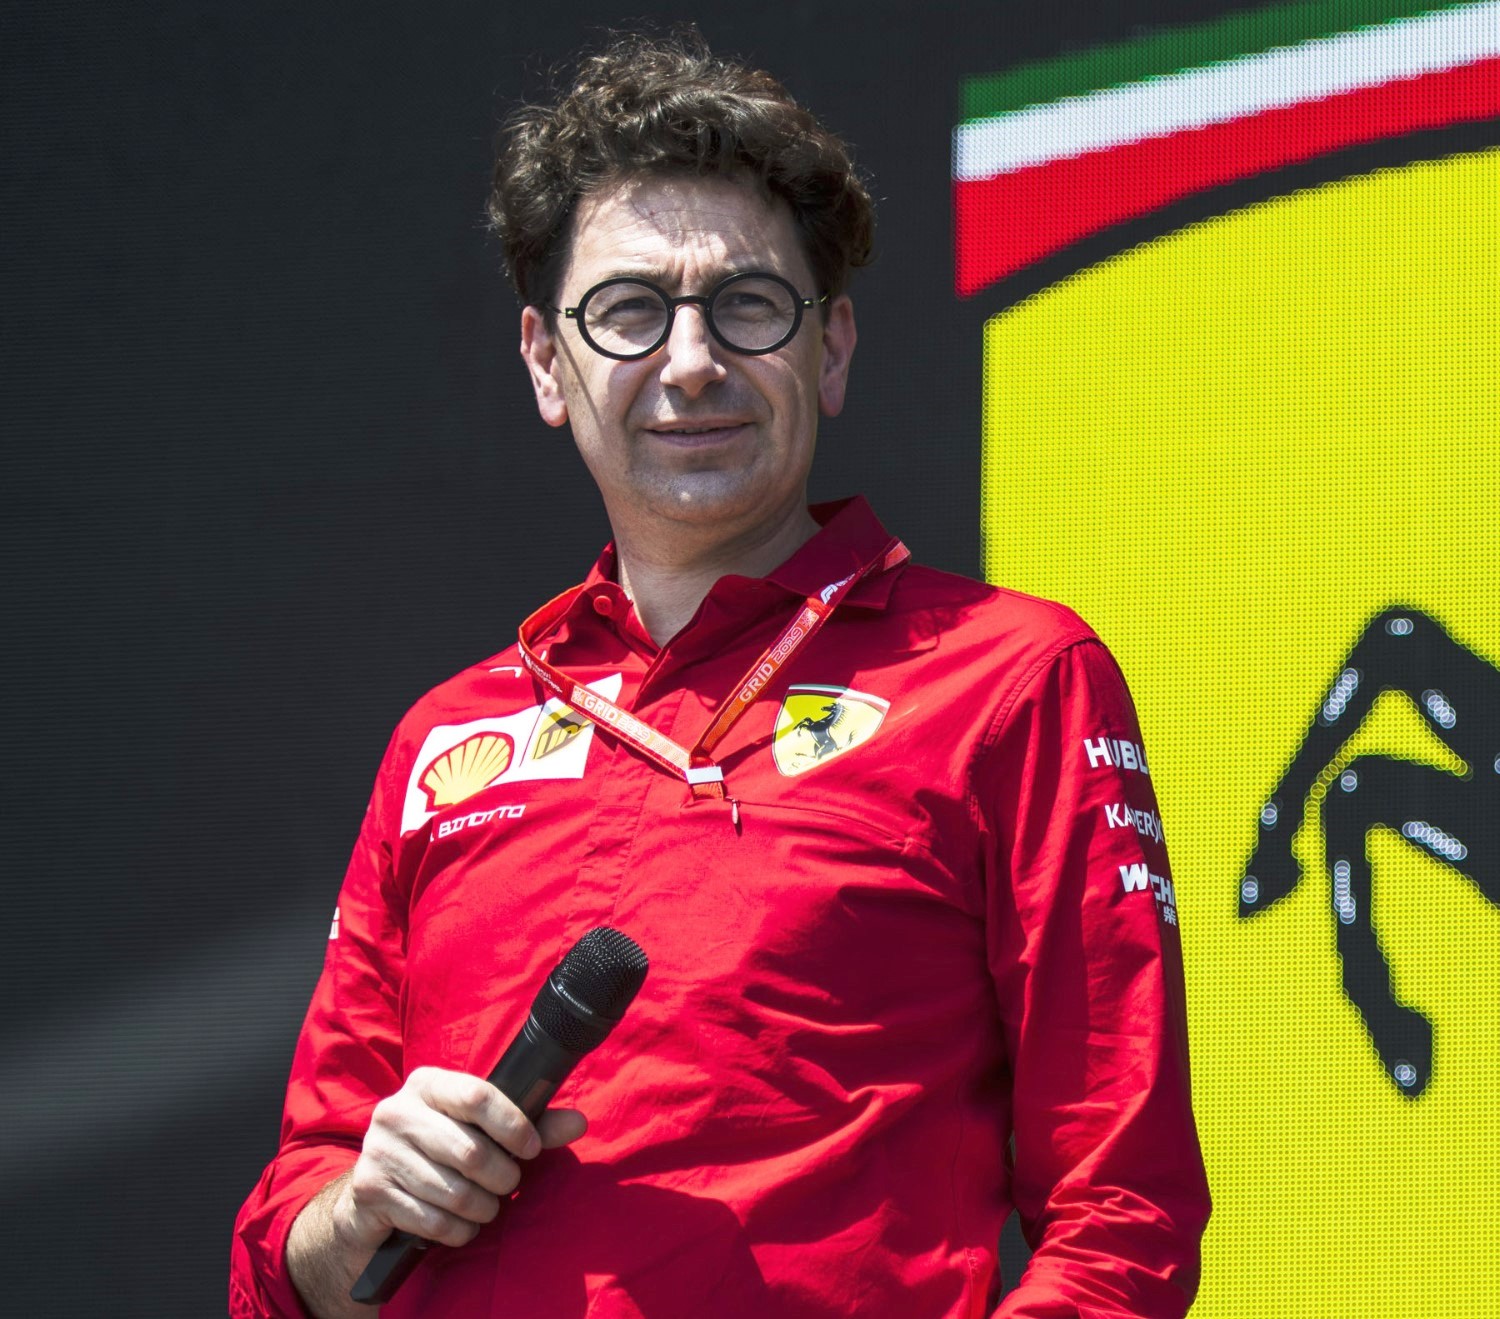 Mattia Binotto says Ferrari expects more from Vettel AR1 Note: Vettel to Binotto - how about designing me a car that can beat the Mercedes